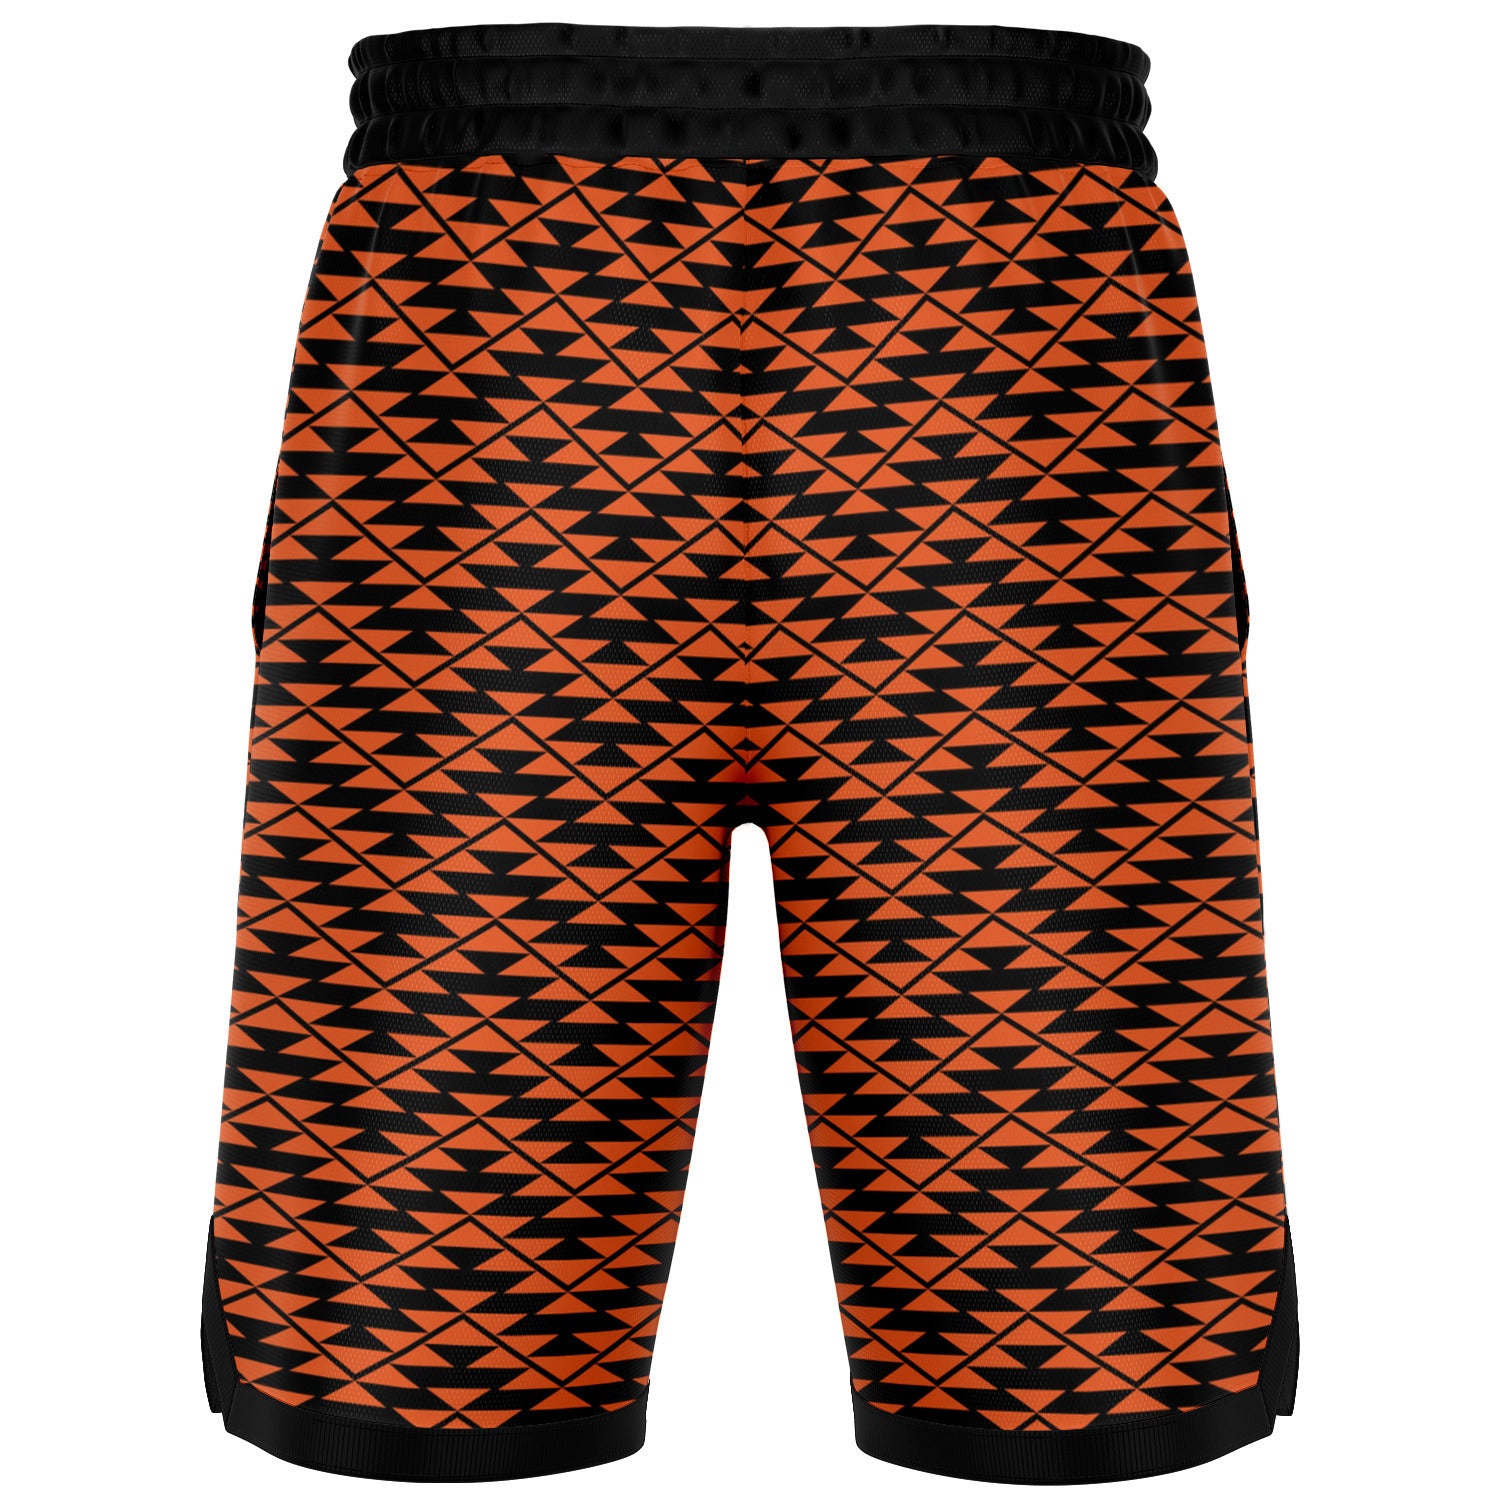 Basketball Shorts With Tribal Design